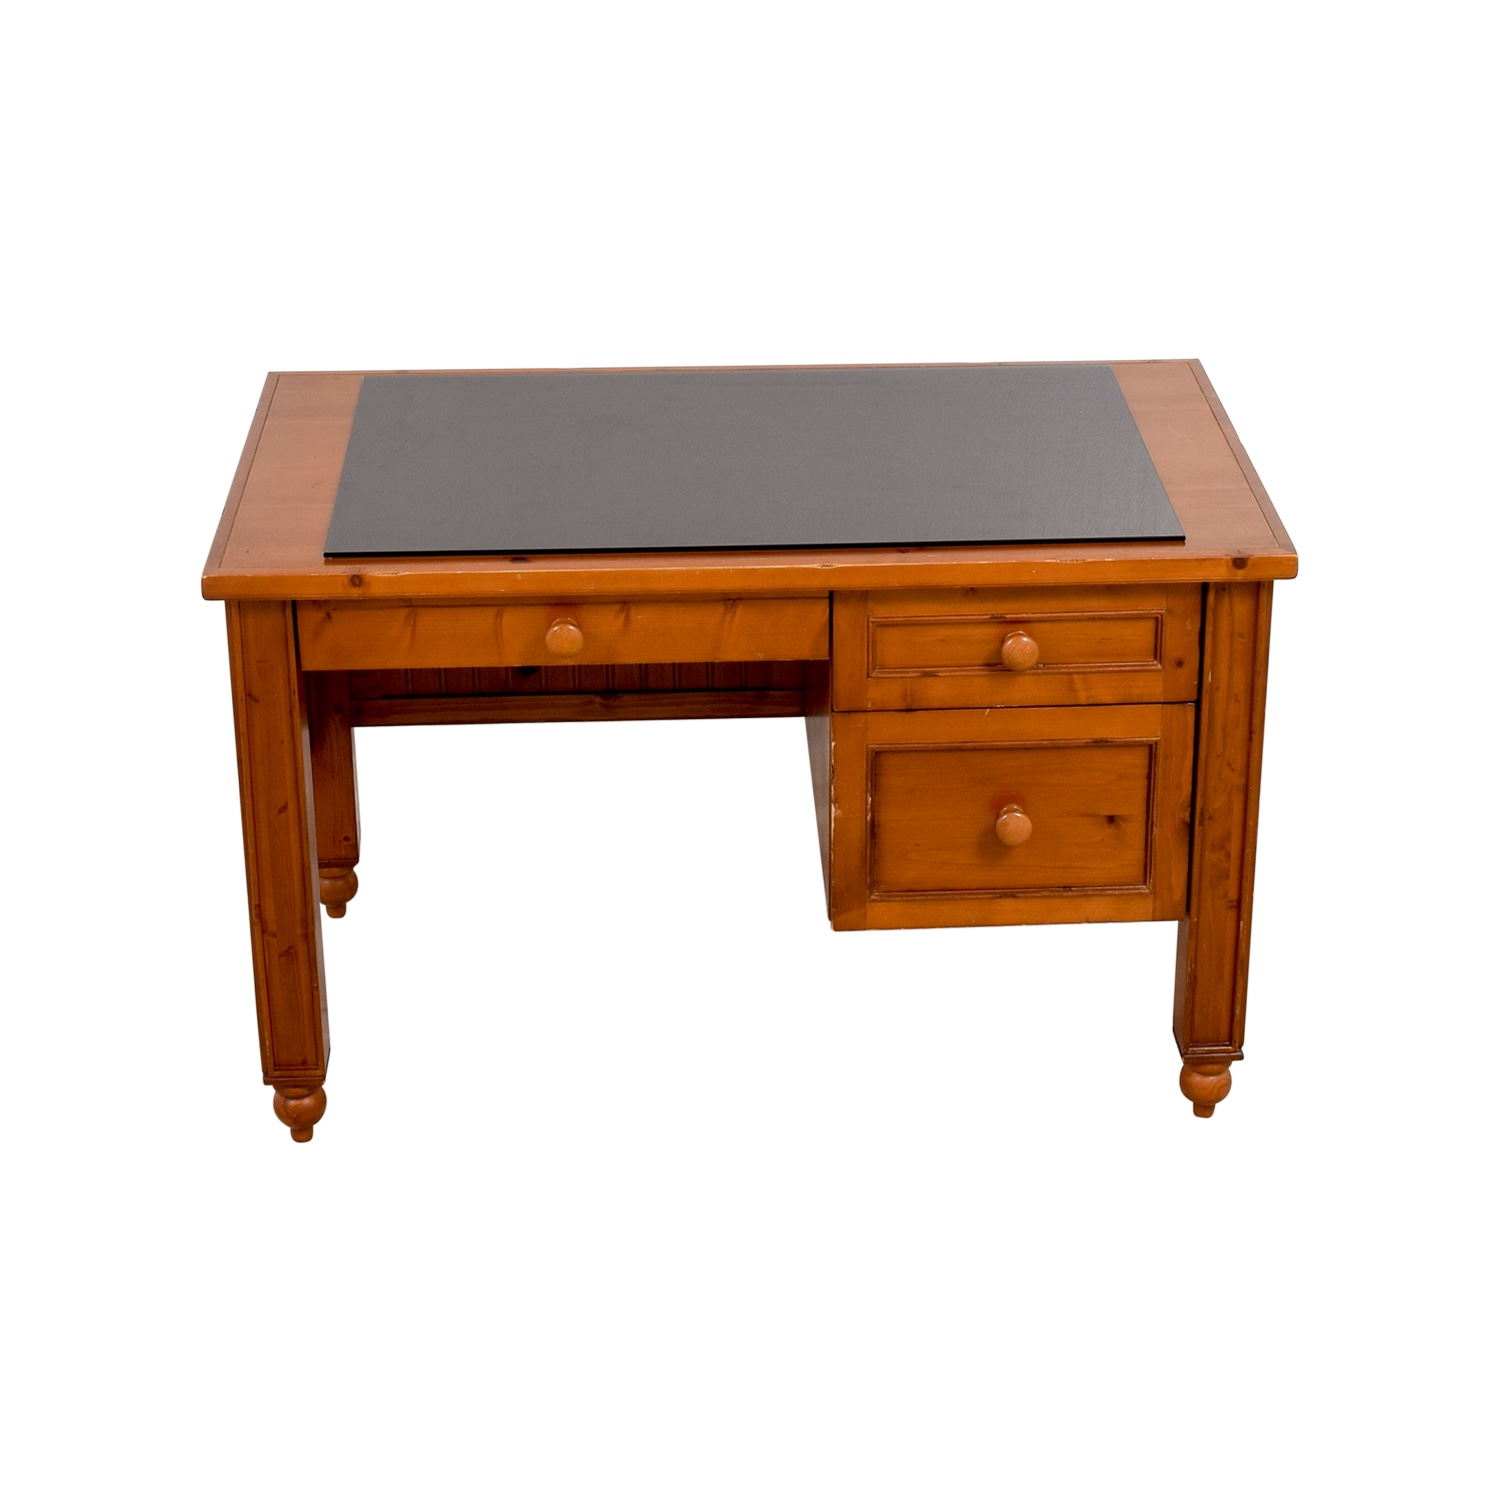 Real Solid Wood Desks For Home Office - Wooden Desks with Drawers.